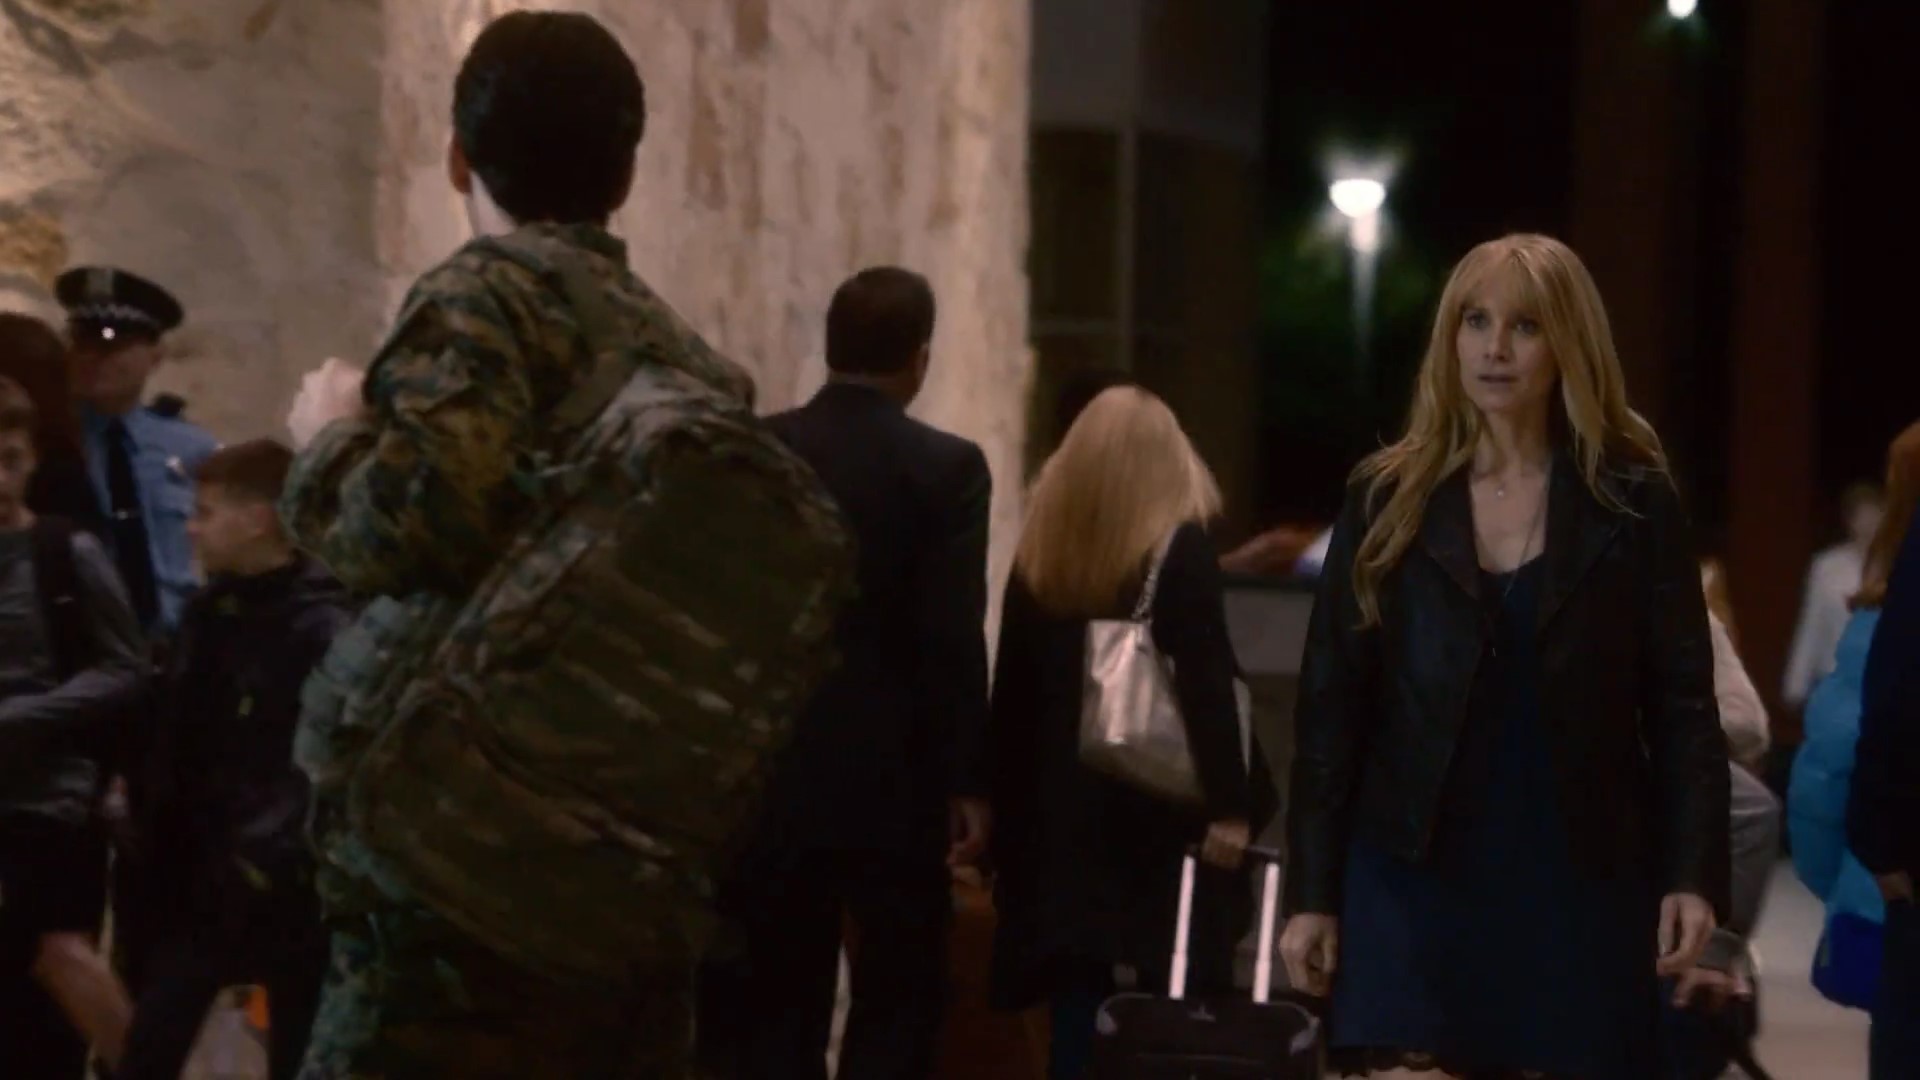 Airport Traveler's Kid in Revolution. Right between Billy Burke and the Policeman.